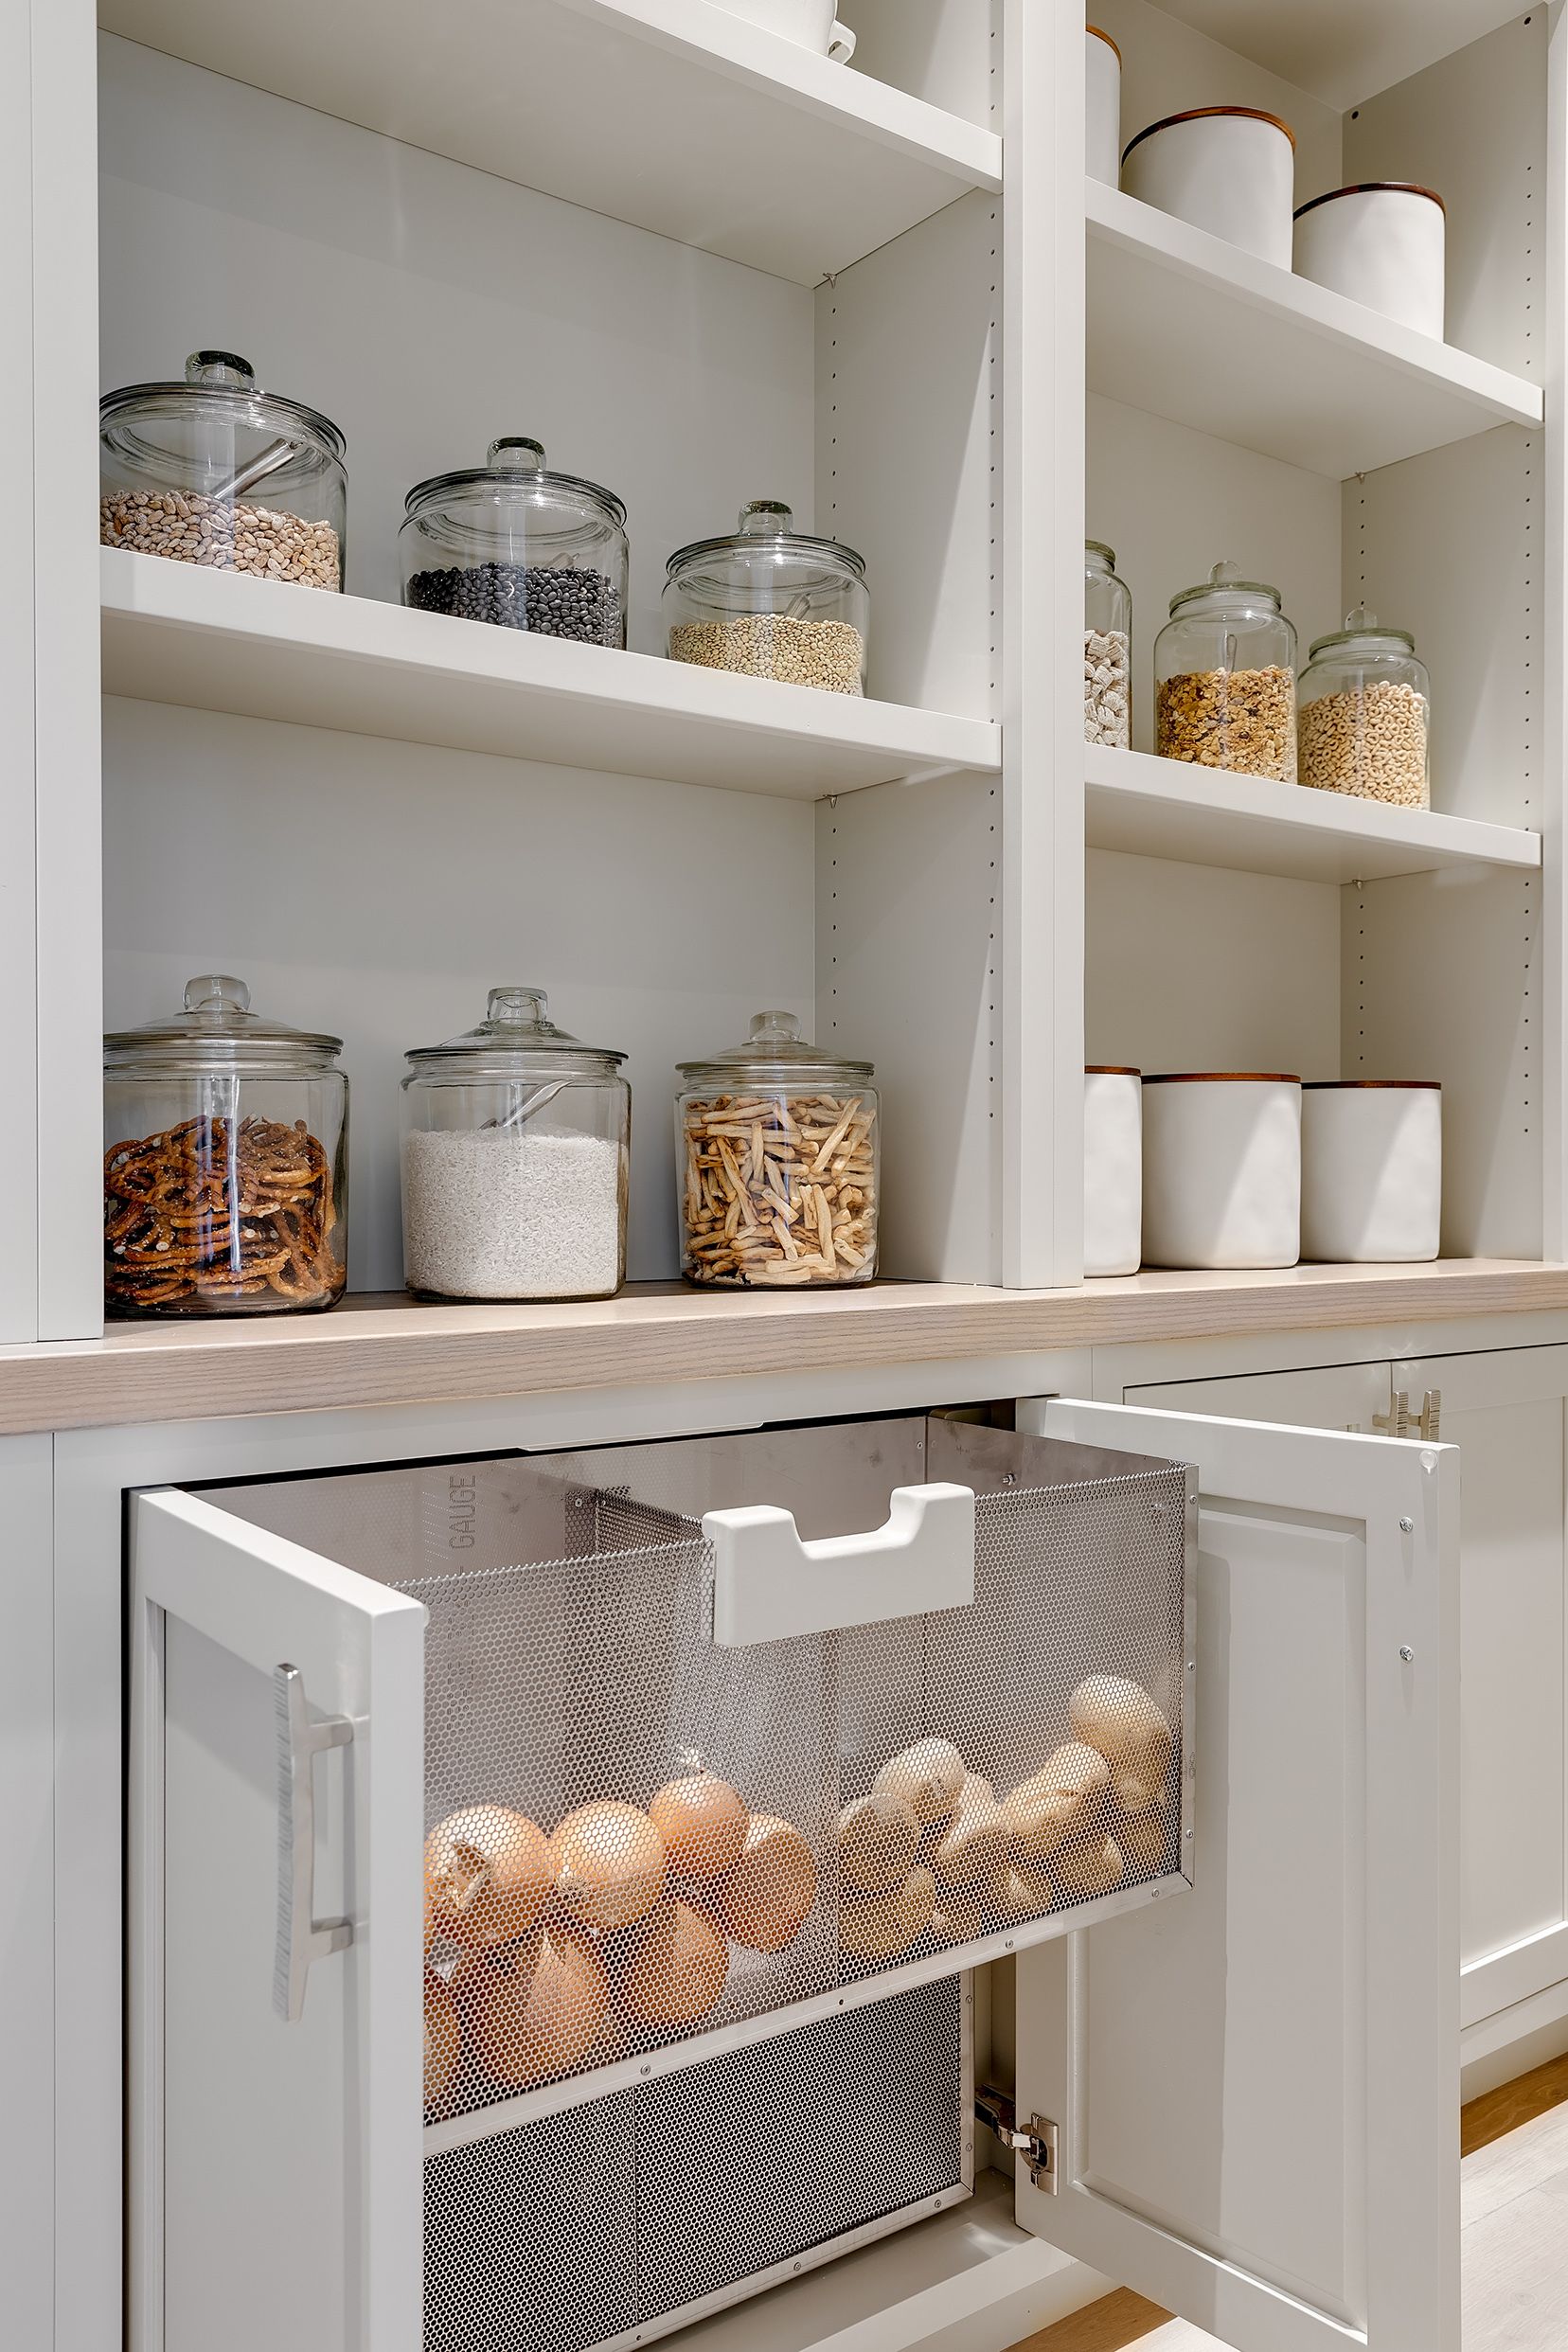 Storage Solutions for a Skinny Pantry - The Homes I Have Made